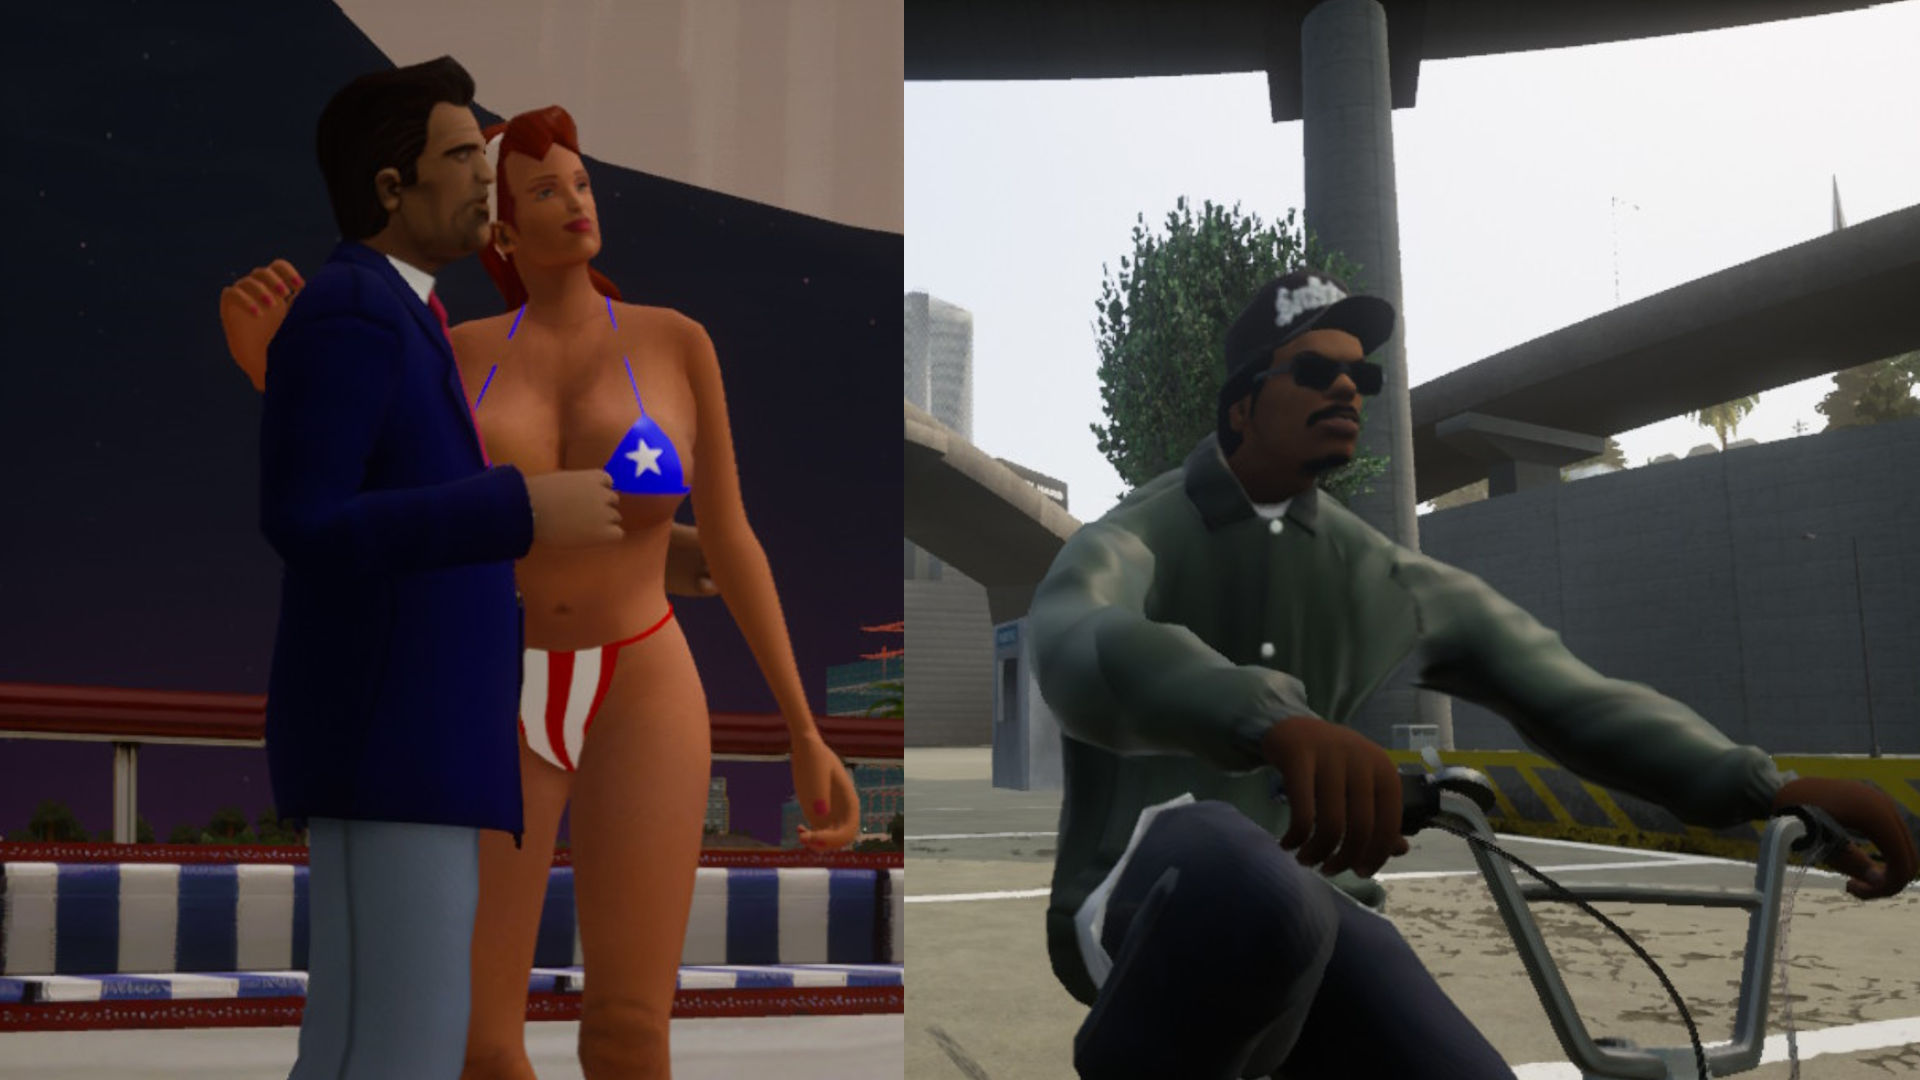 Review: Grand Theft Auto: The Trilogy - The Definitive Edition